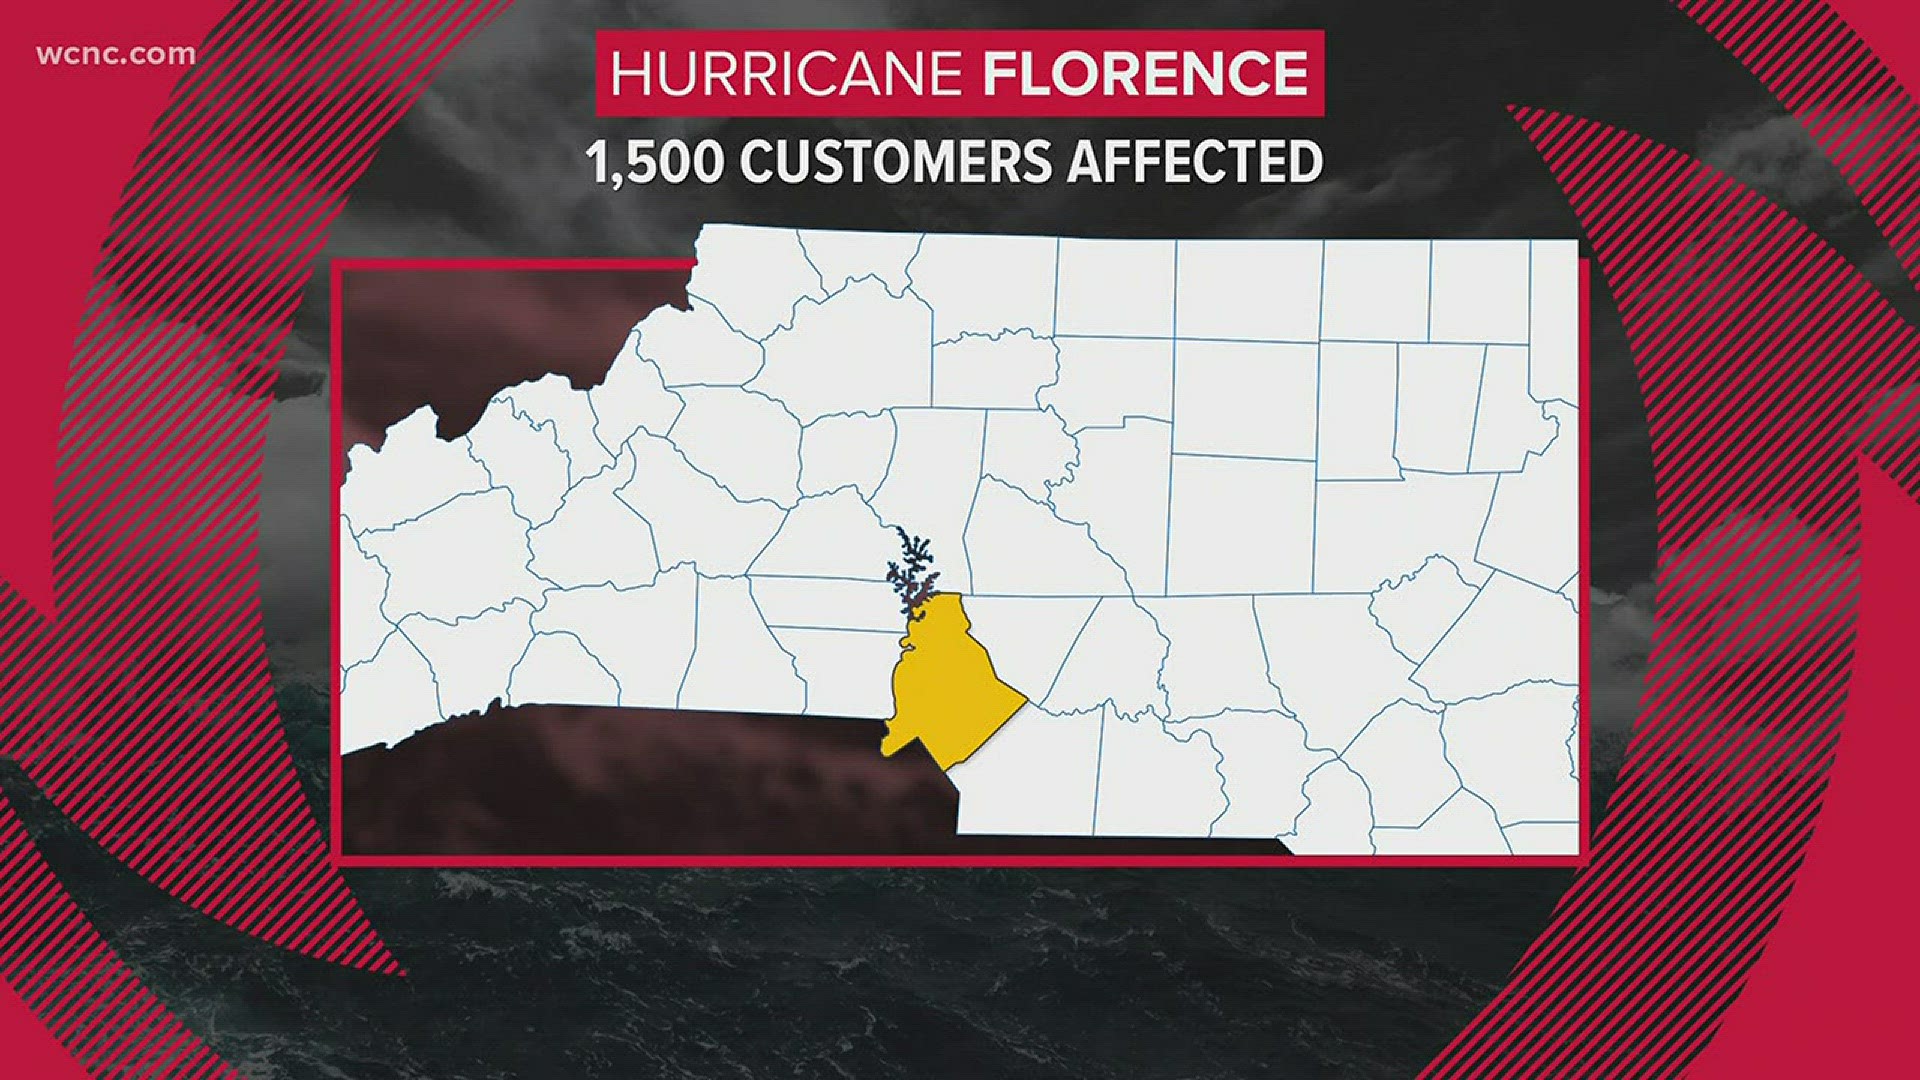 Over 700,000 are without power in North Carolina due to Florence.